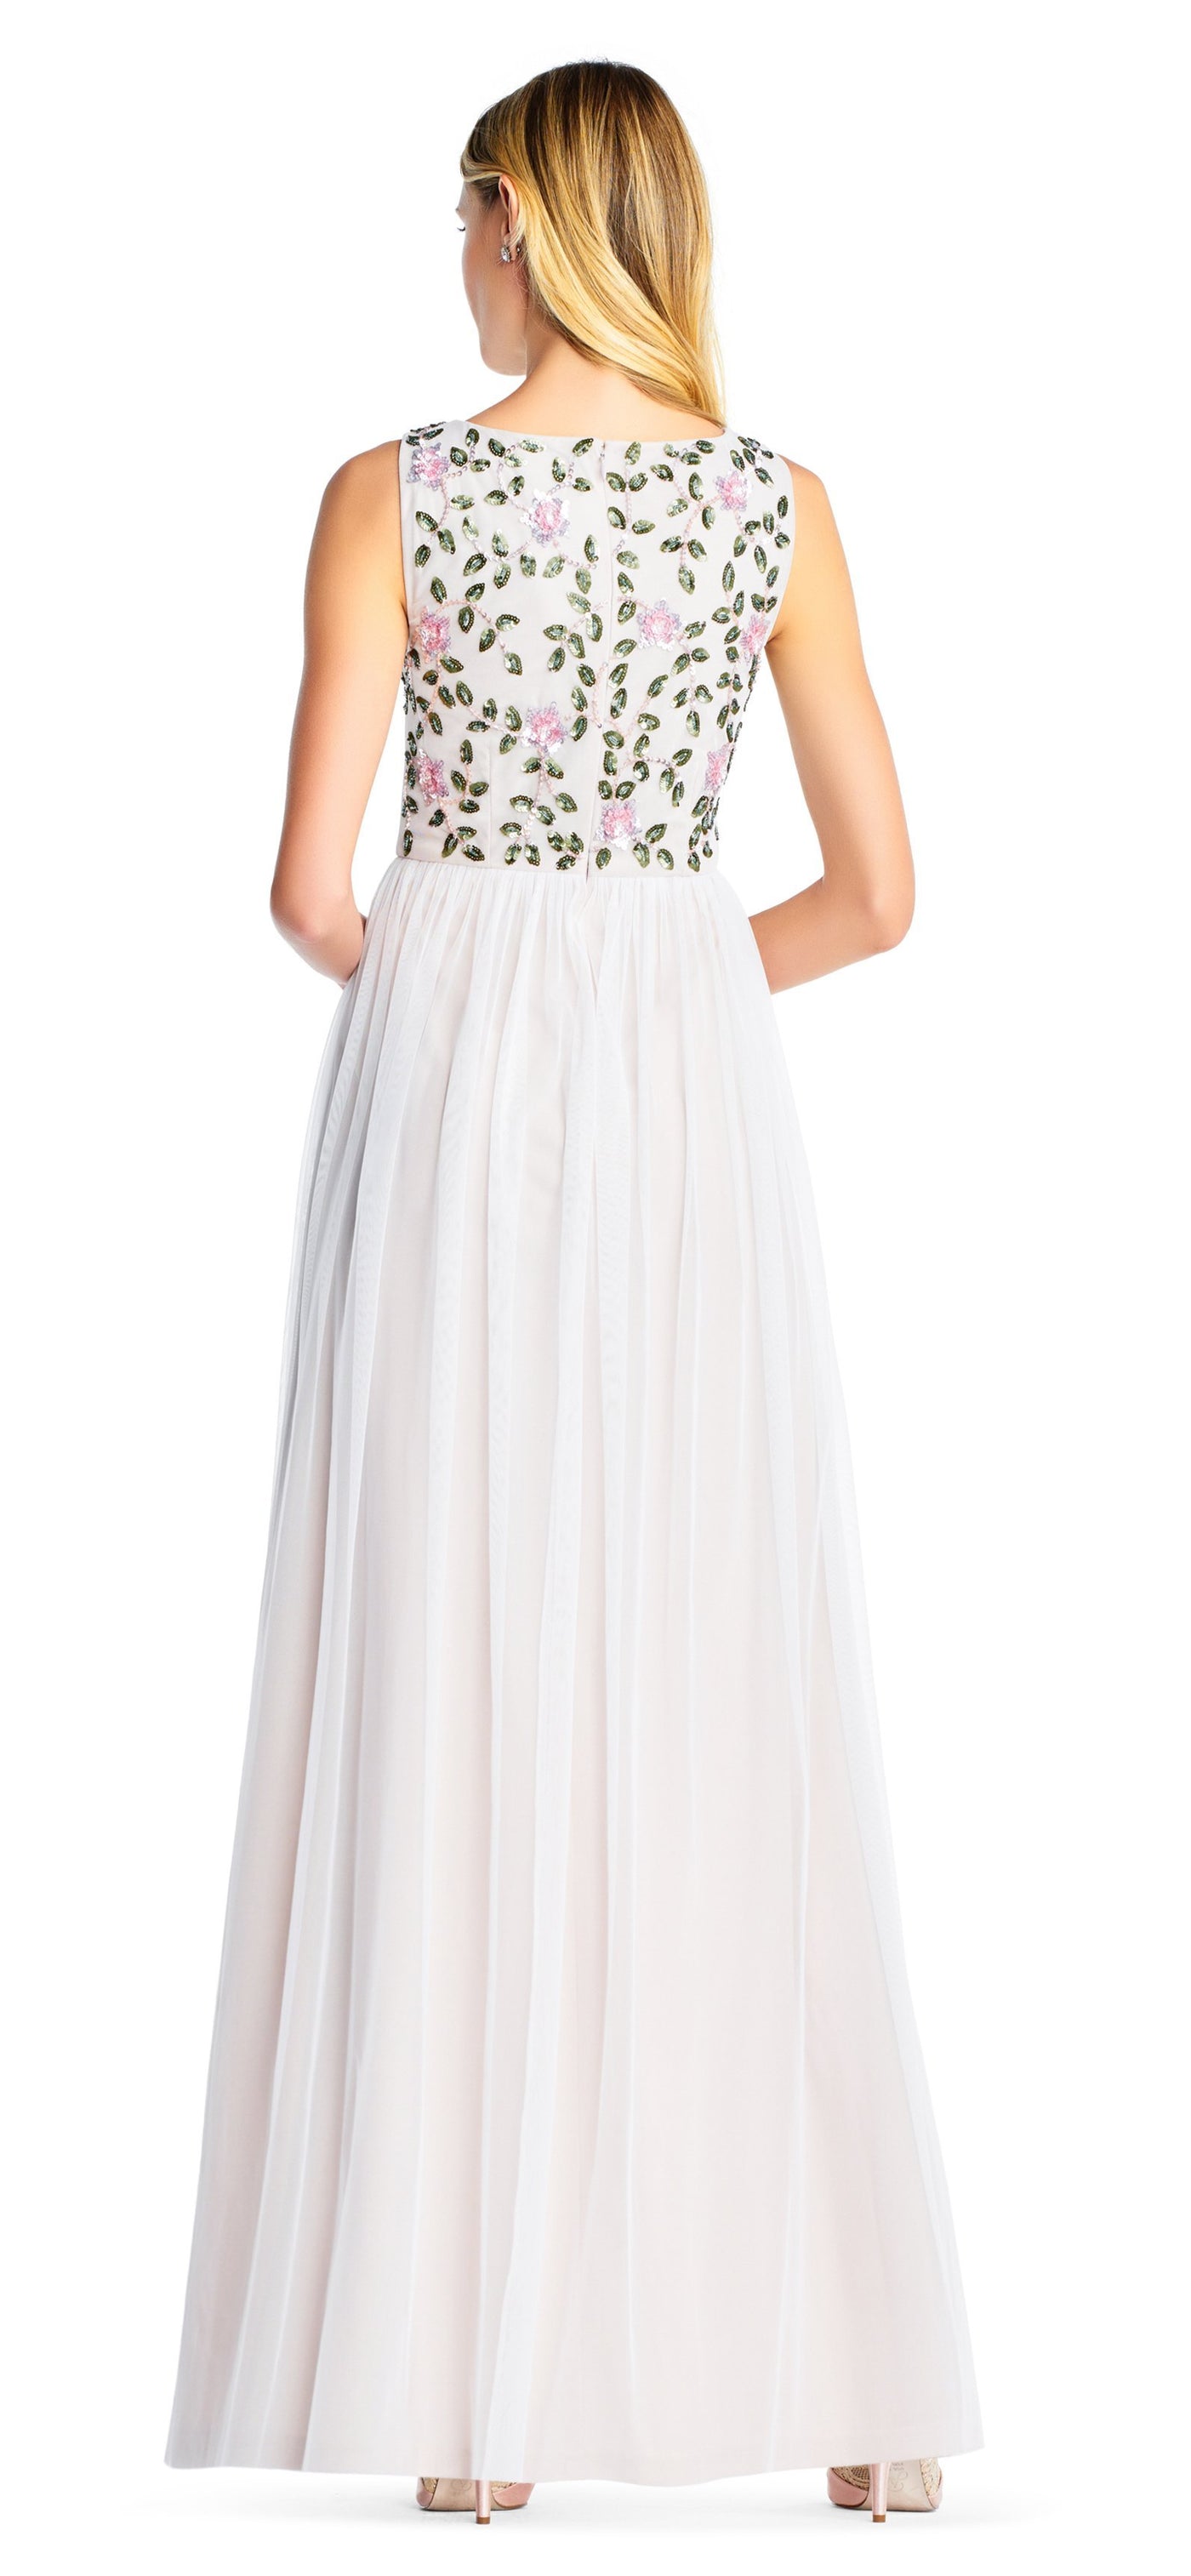 Adrianna Papell - AP1E203409 Bedazzled Bateau Mesh A-line Dress In White and Multi-Color